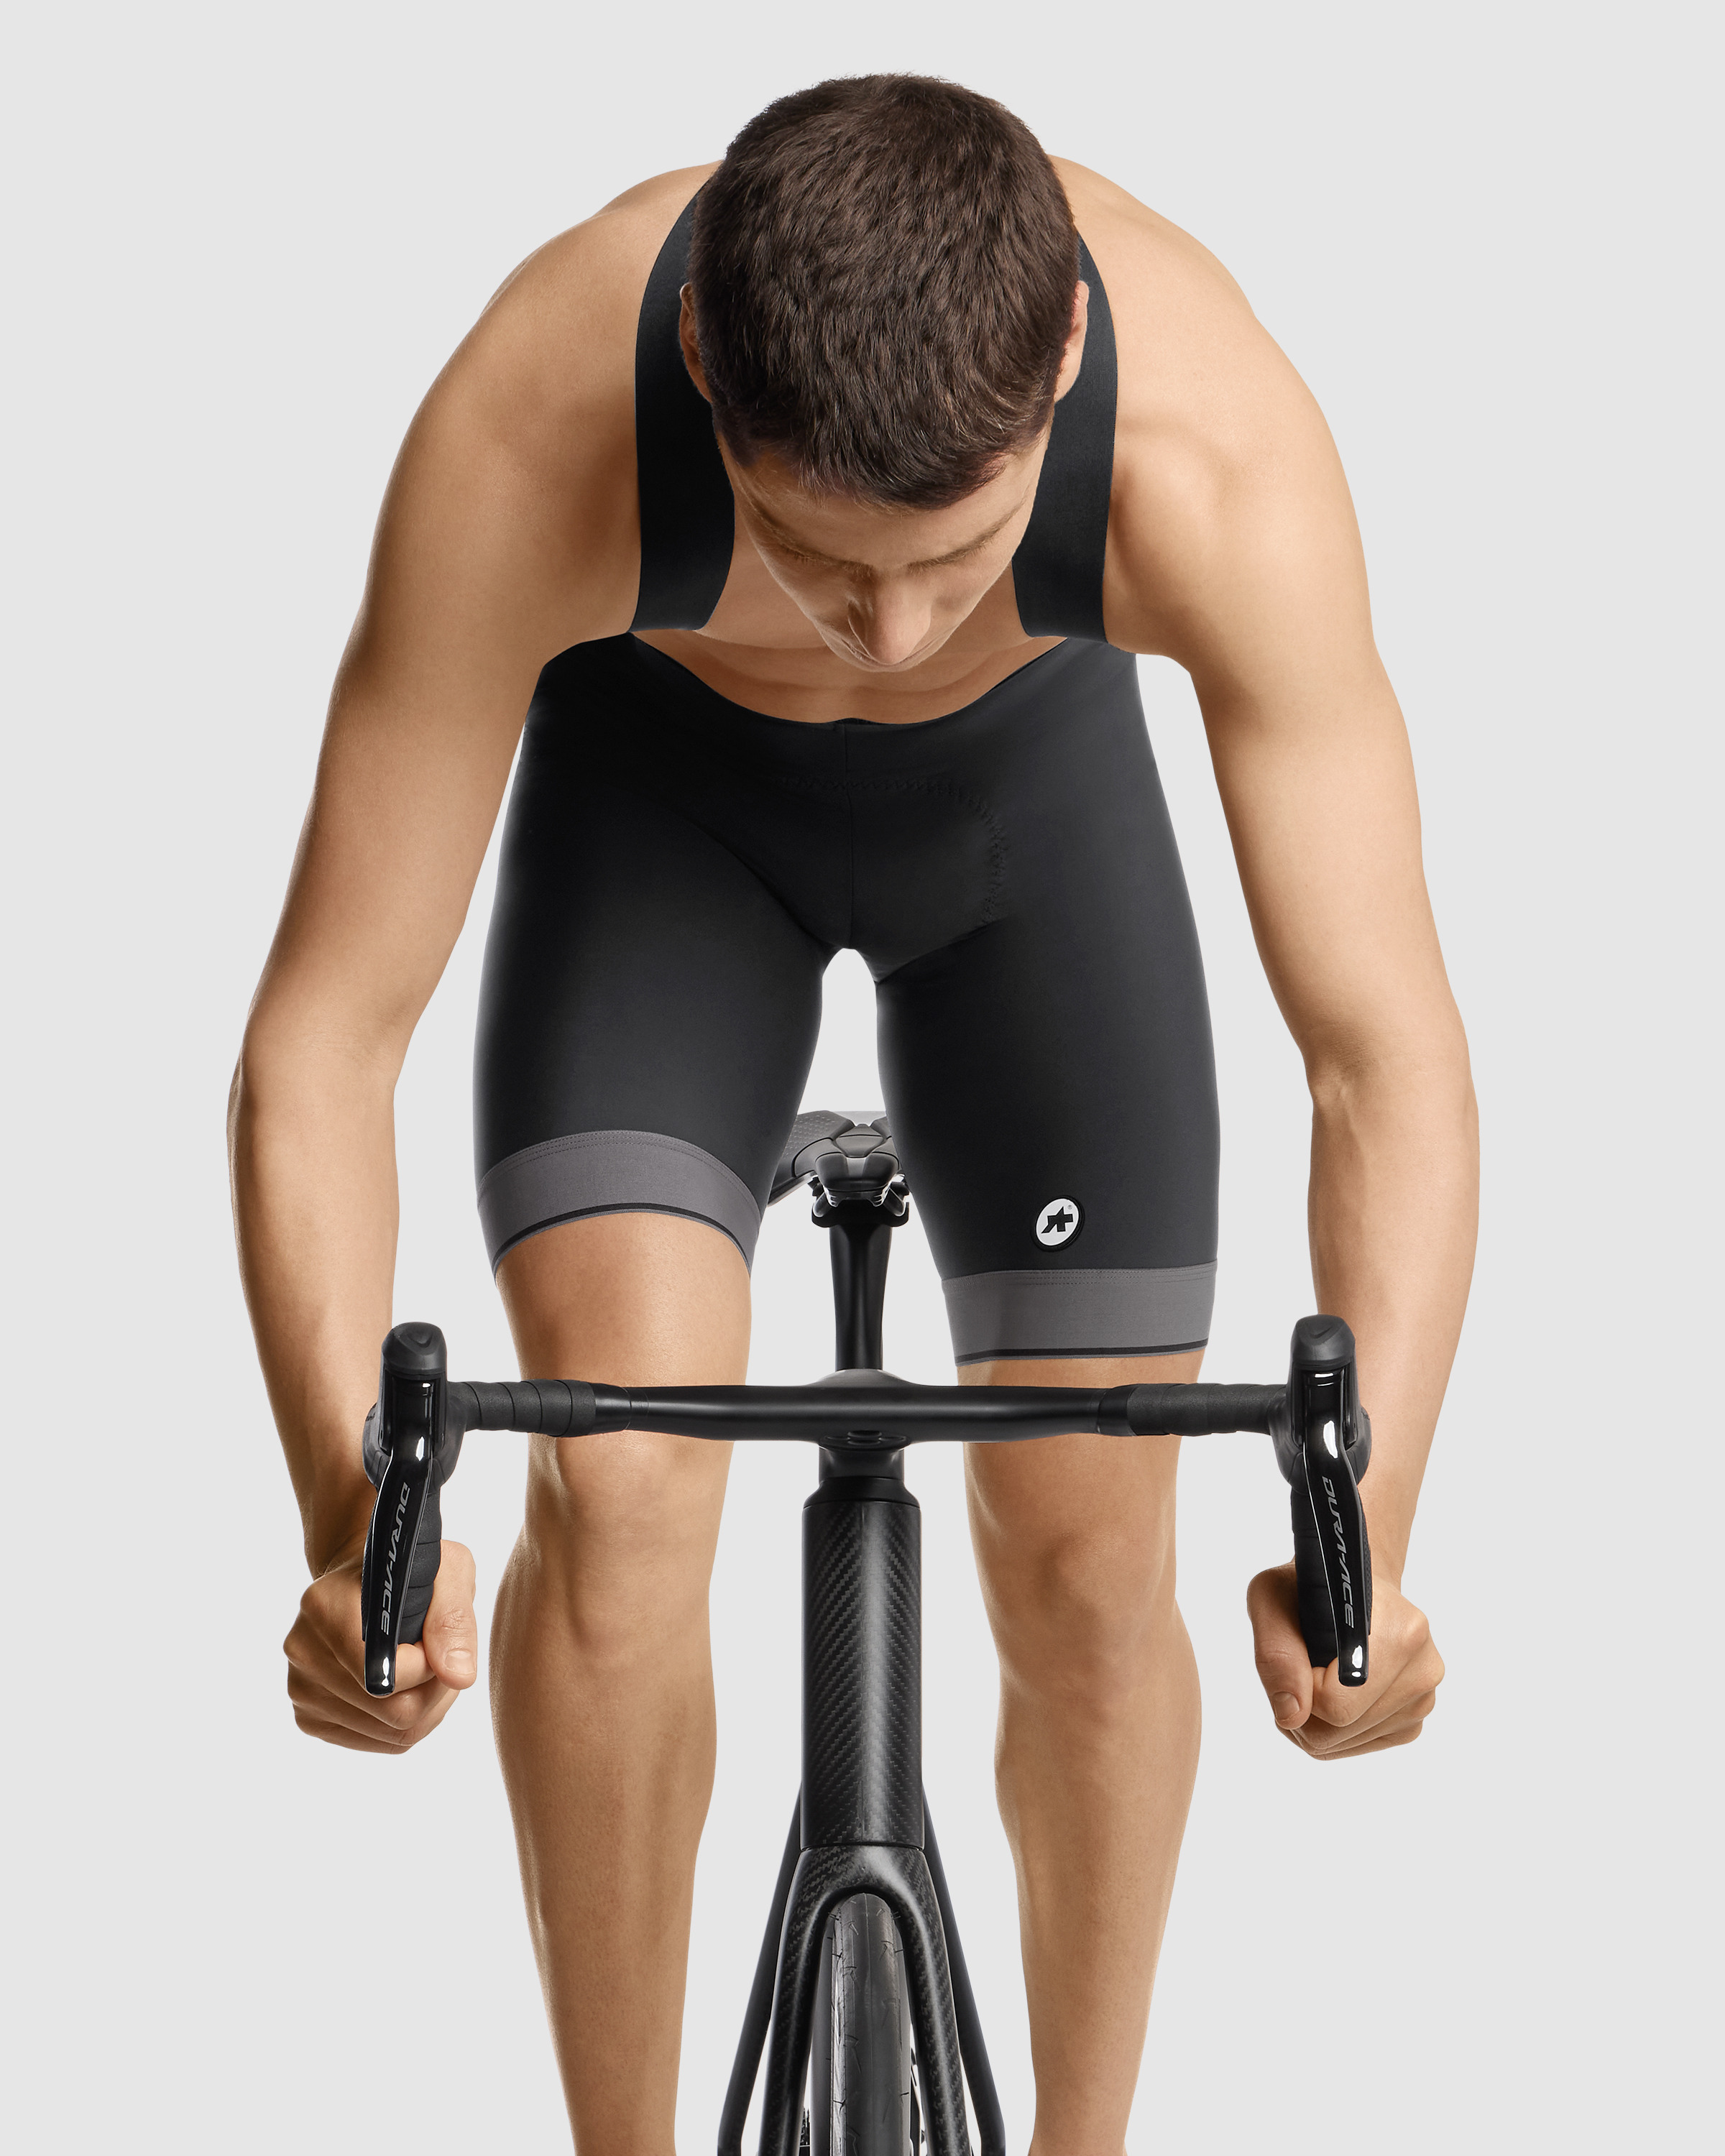 REFORM BIB SHORTS P1 - ASSOS Of Switzerland - Official Outlet